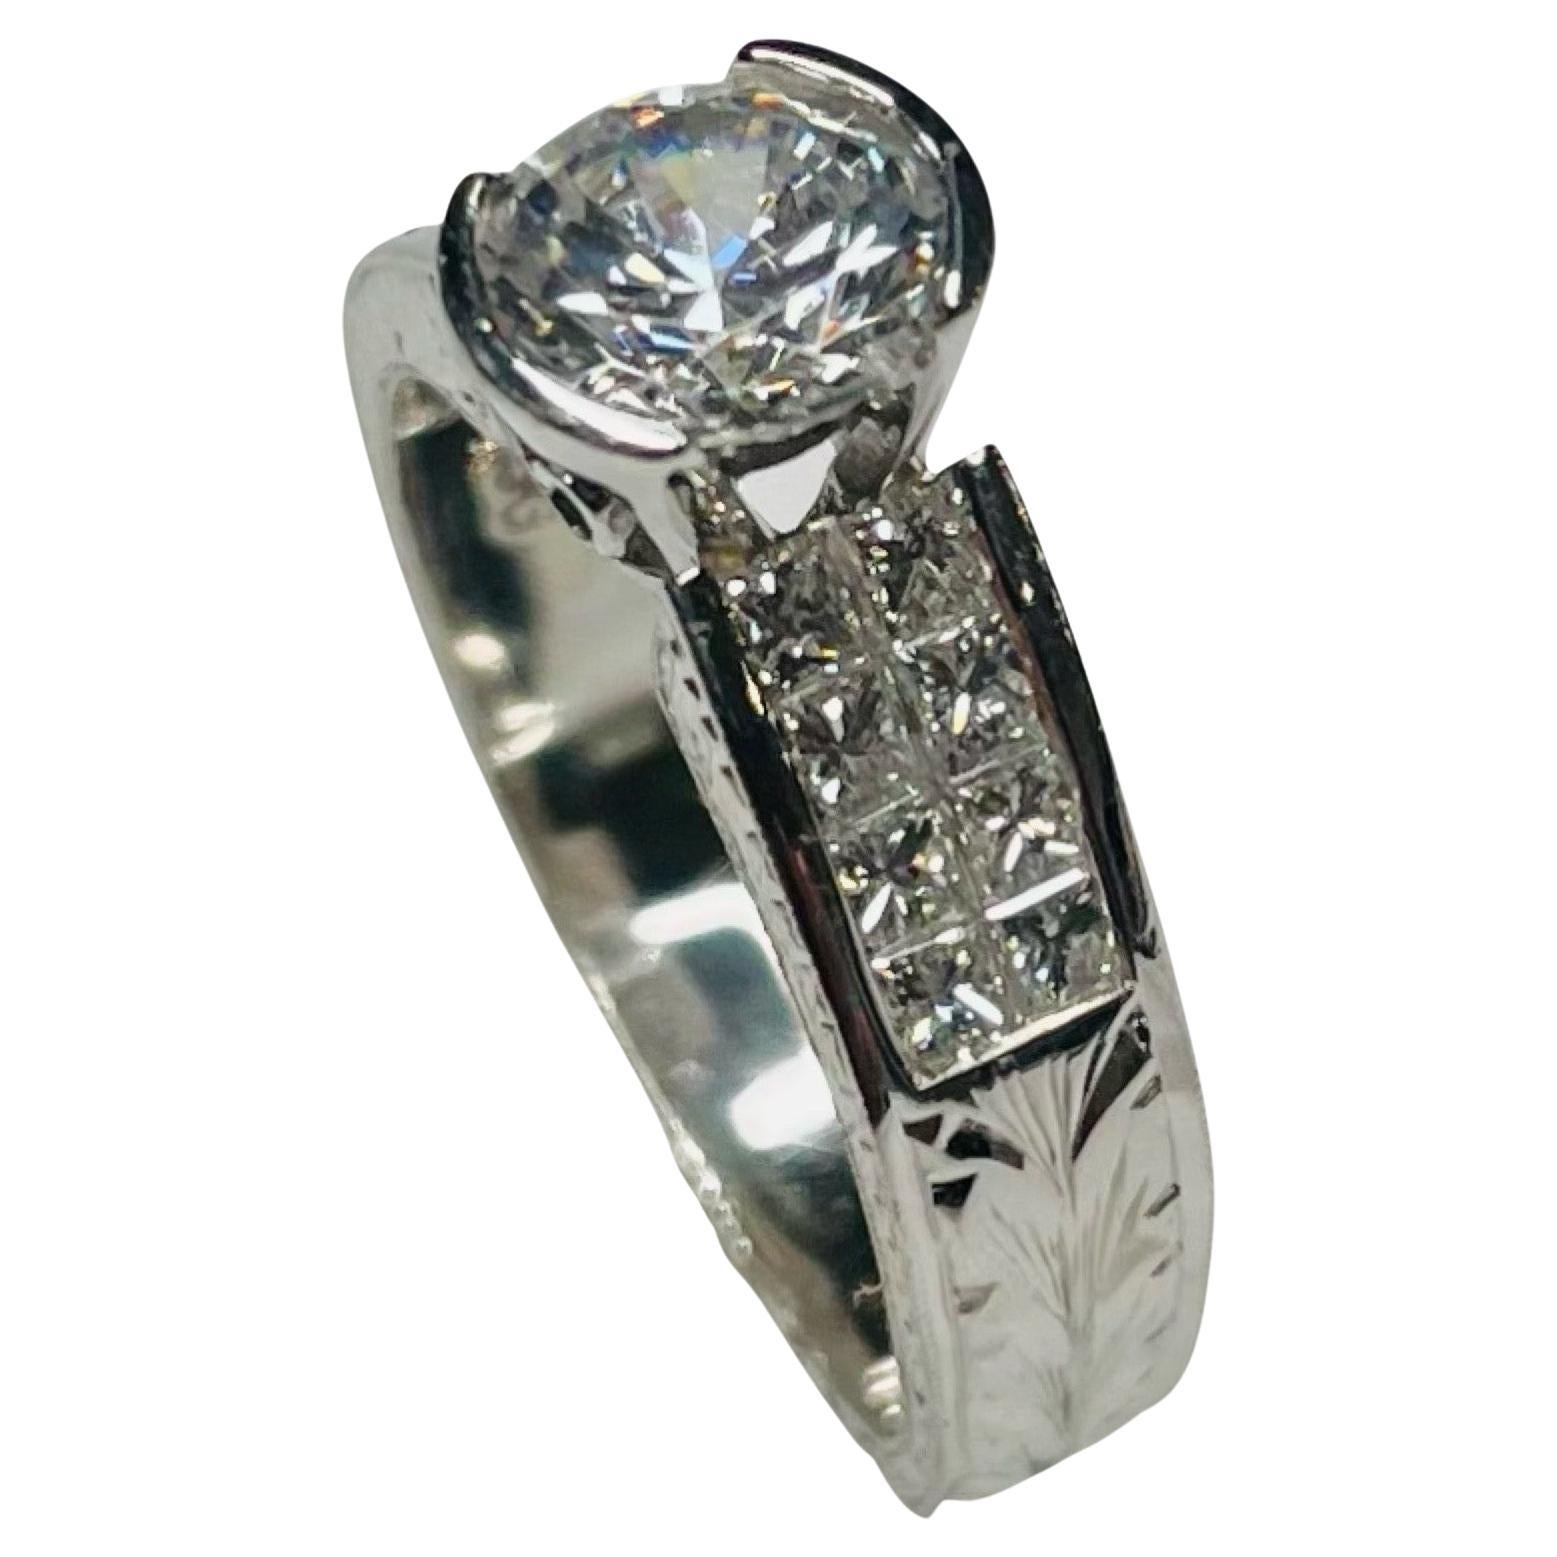 Simon G Platinum Invisible Set Engagement Ring. It has a 6.5mm Cubic Zirconia Center, which is equivalent to a 1.0 carat diamond size. It is set in a half bezel. This CZ can be replaced with a colored stone, moissanite or lab created or natural